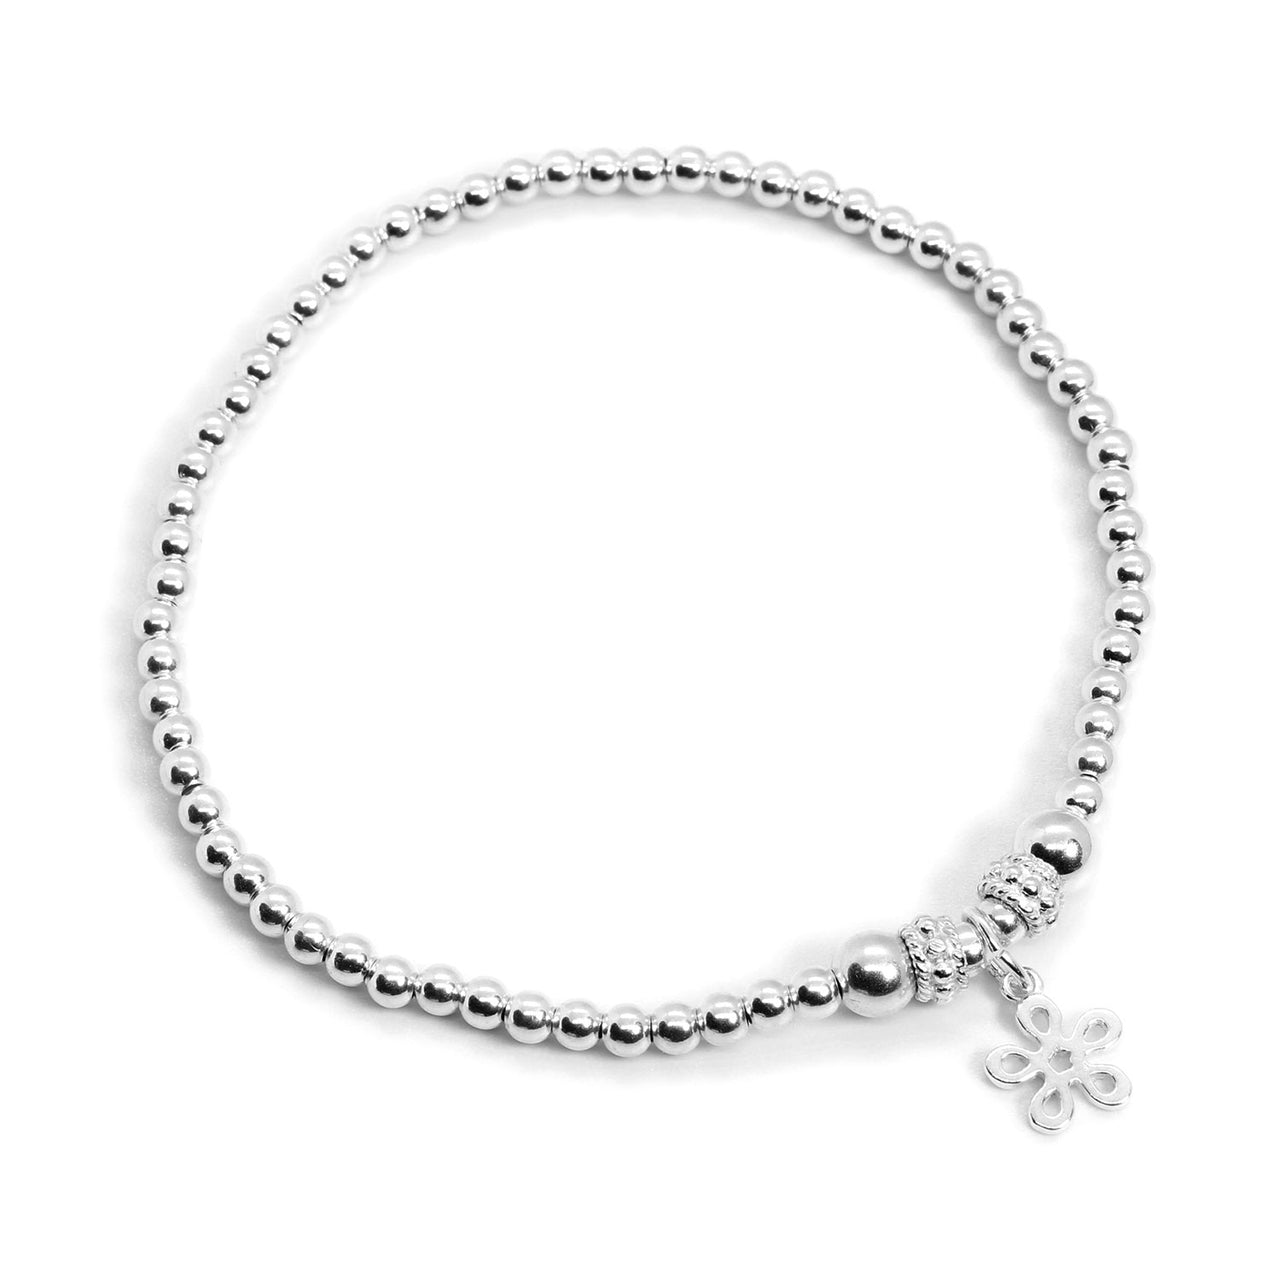 Daisy Charm Sterling Silver Stacking Bracelet